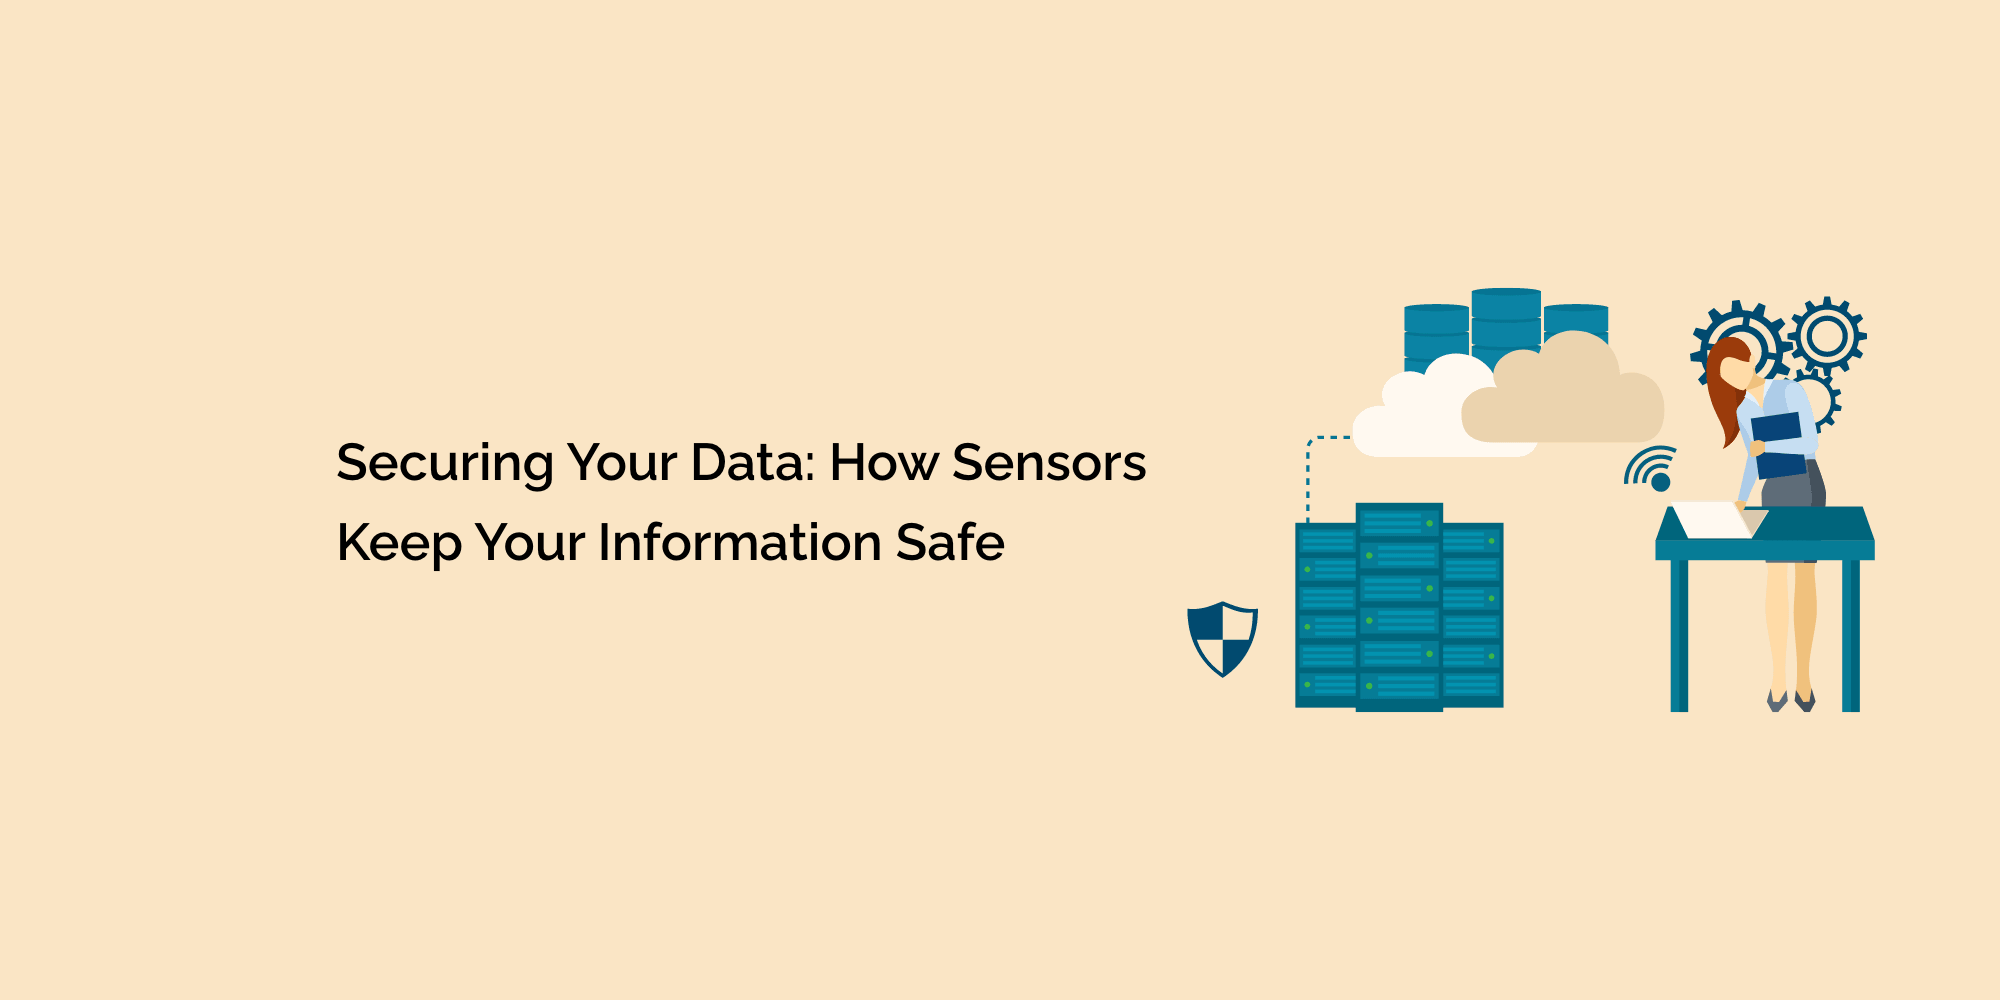 Securing Your Data: How Sensors Keep Your Information Safe